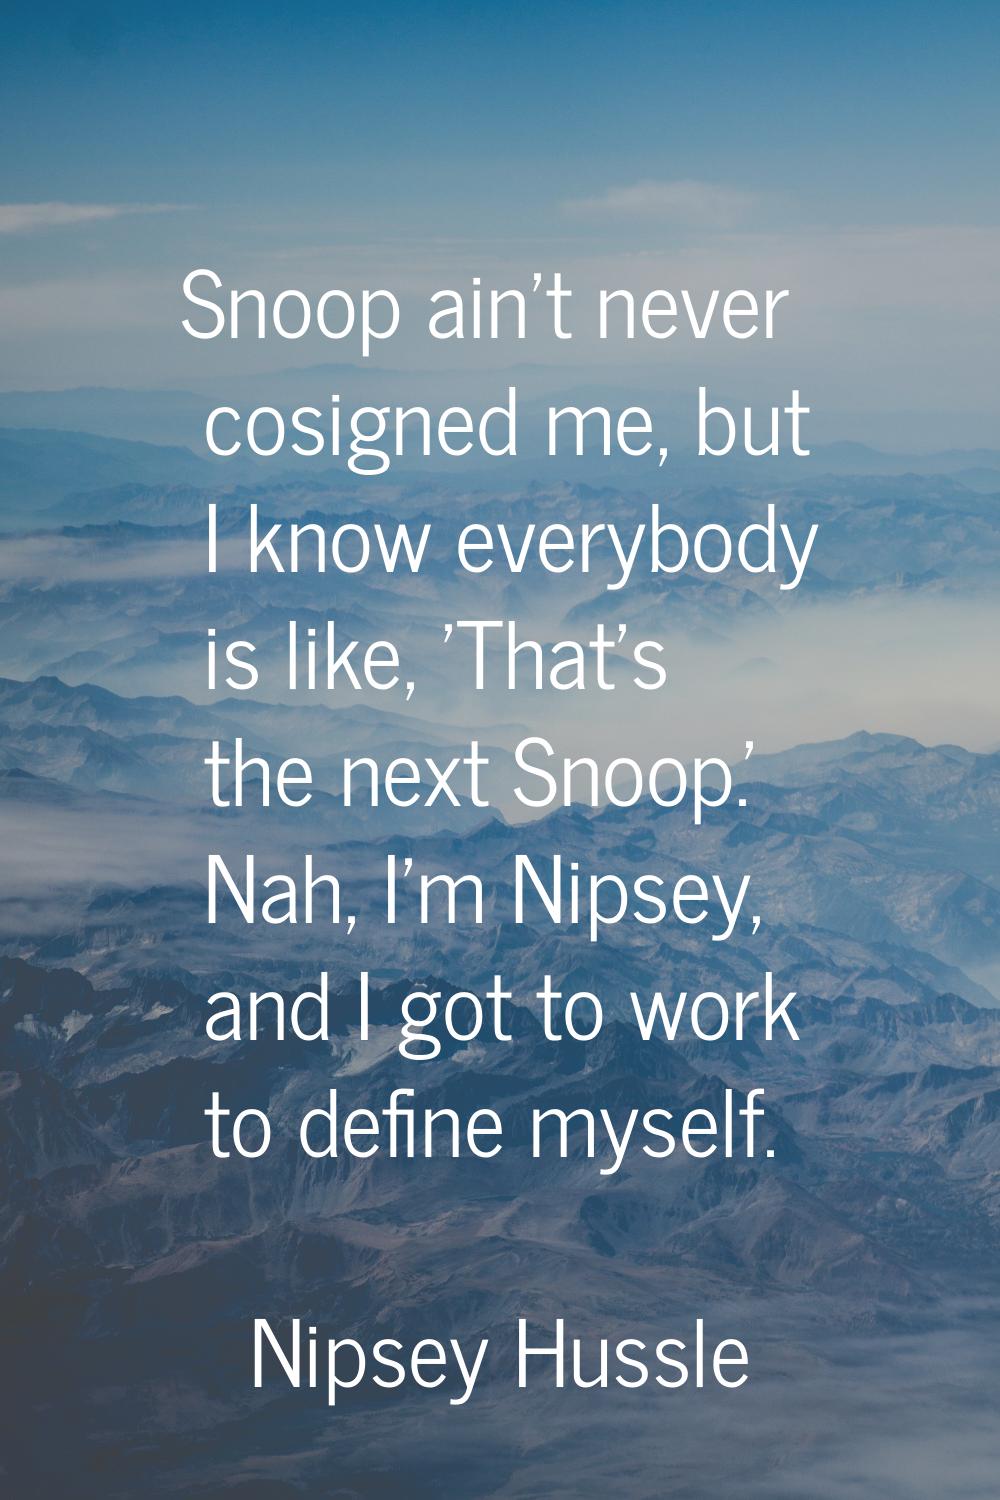 Snoop ain't never cosigned me, but I know everybody is like, 'That's the next Snoop.' Nah, I'm Nips